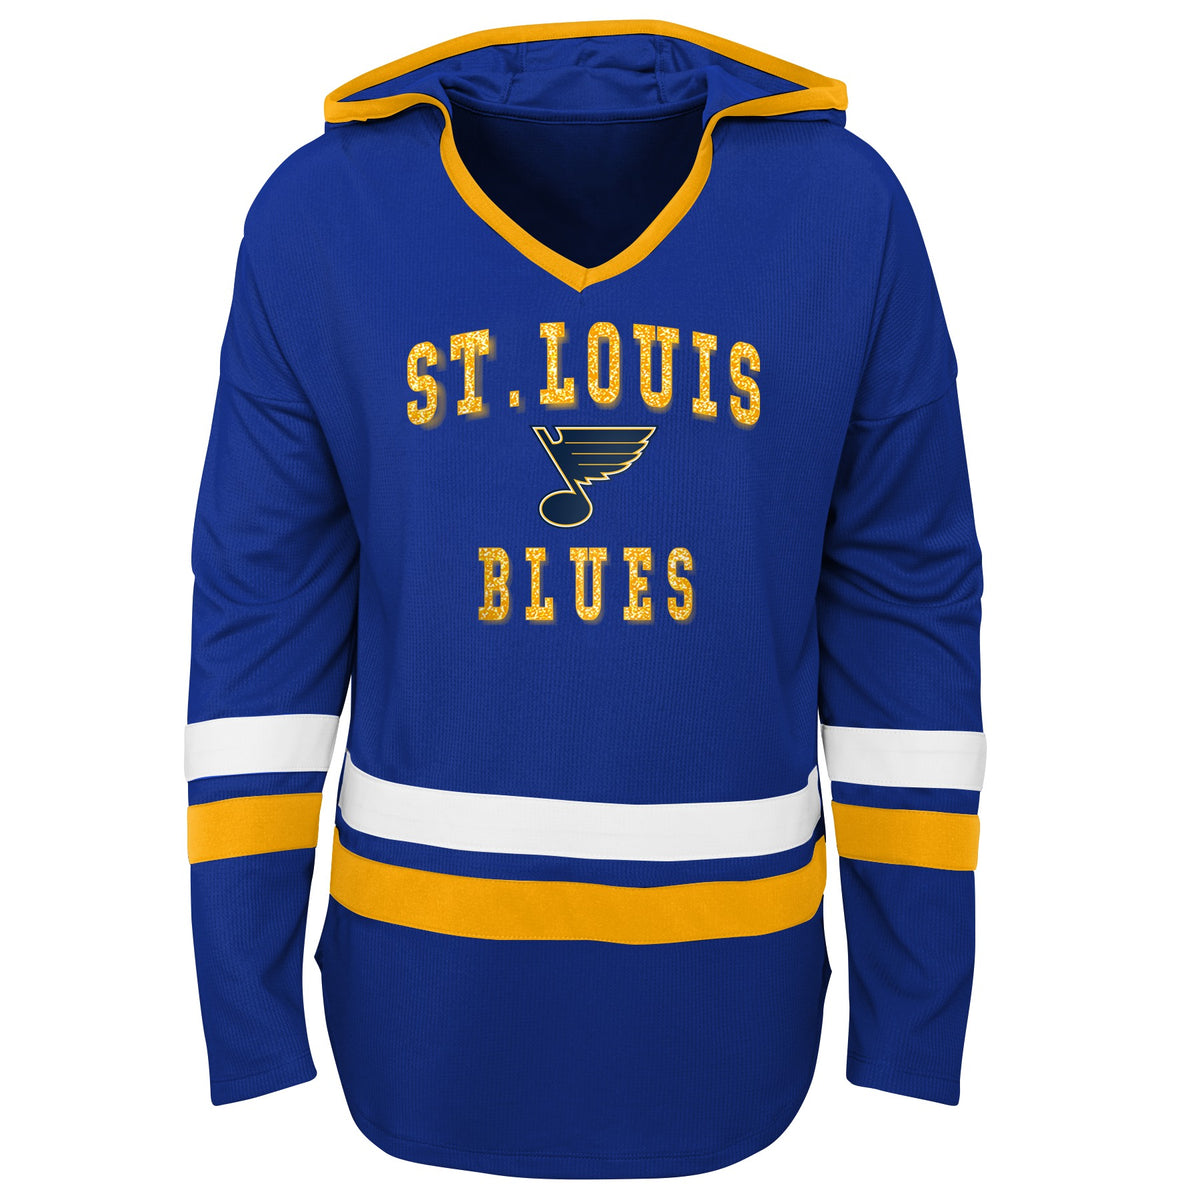 Outerstuff Girls 7-16 St. Louis Blues Celly Tee, Girl's, Size: Large 14